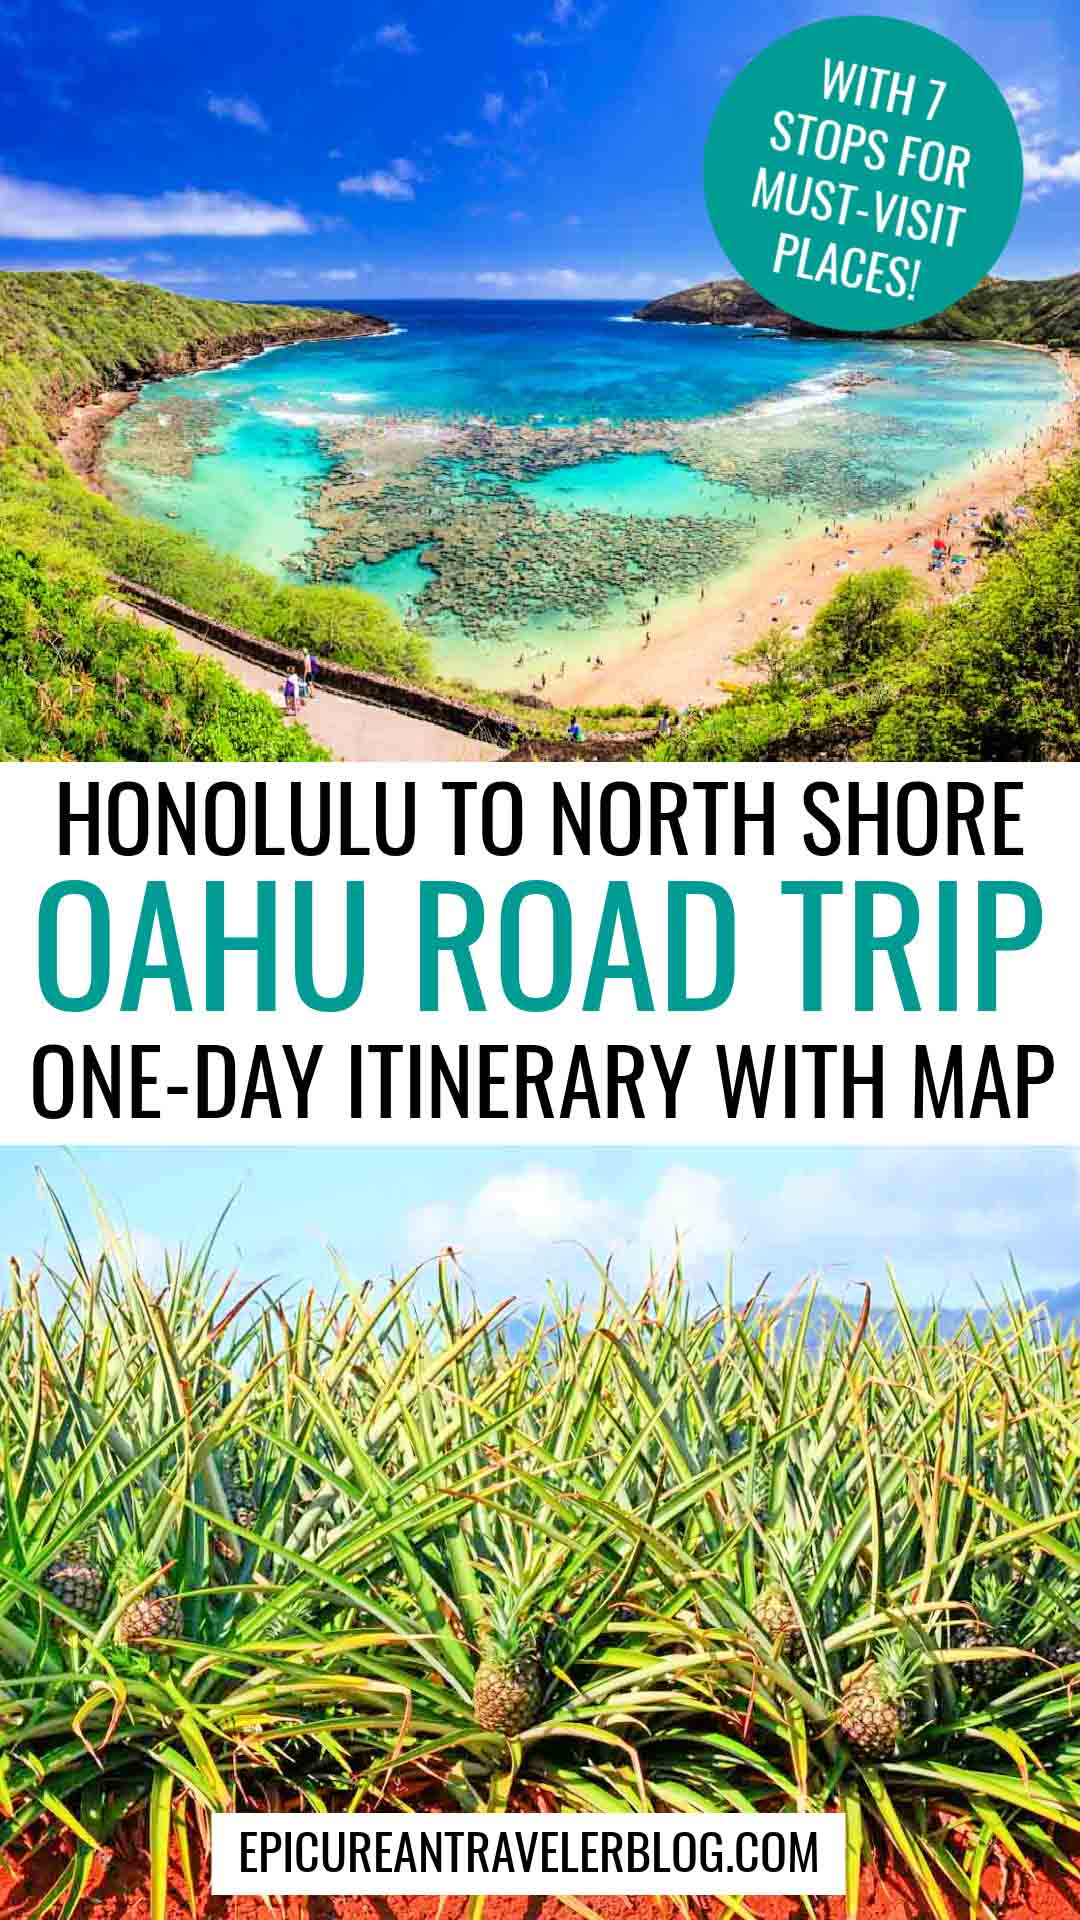 Oahu road trip: One-day itinerary from Honolulu to North Shore with map to 7 stops including Hanauma Bay and Dole Plantation (as pictured here)